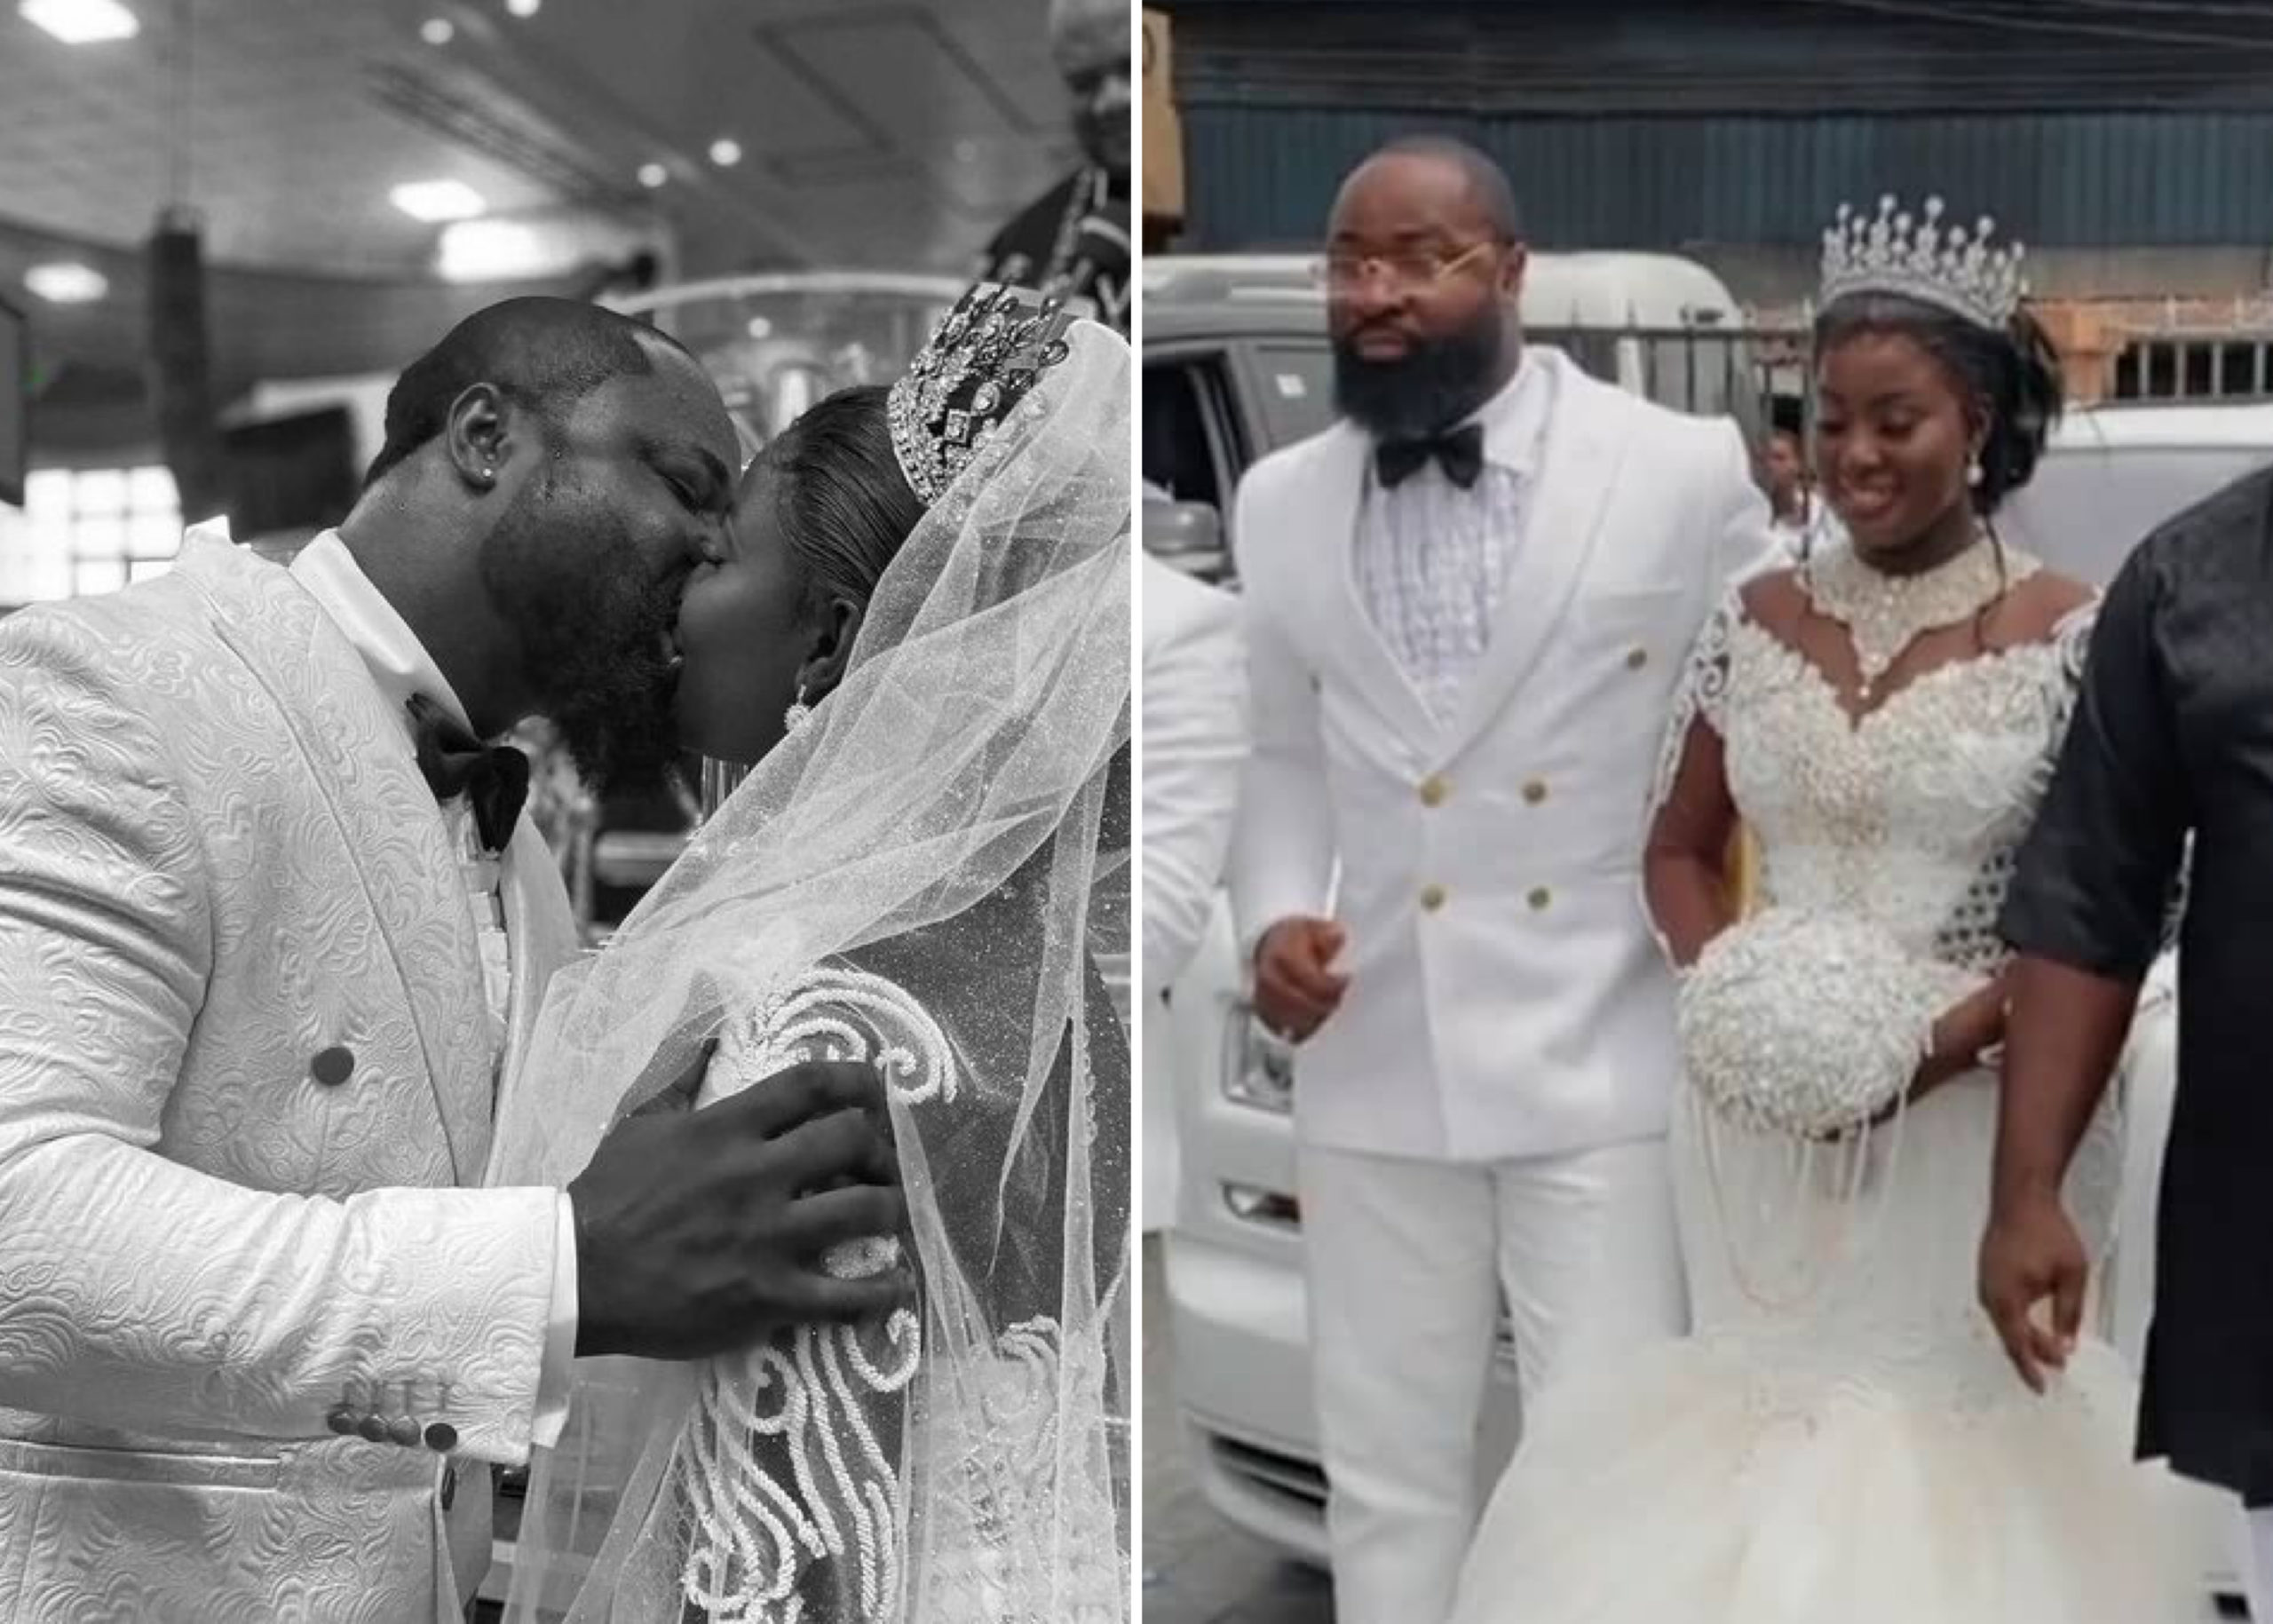 Singer, Harrysong Tie Knot With Fiancée